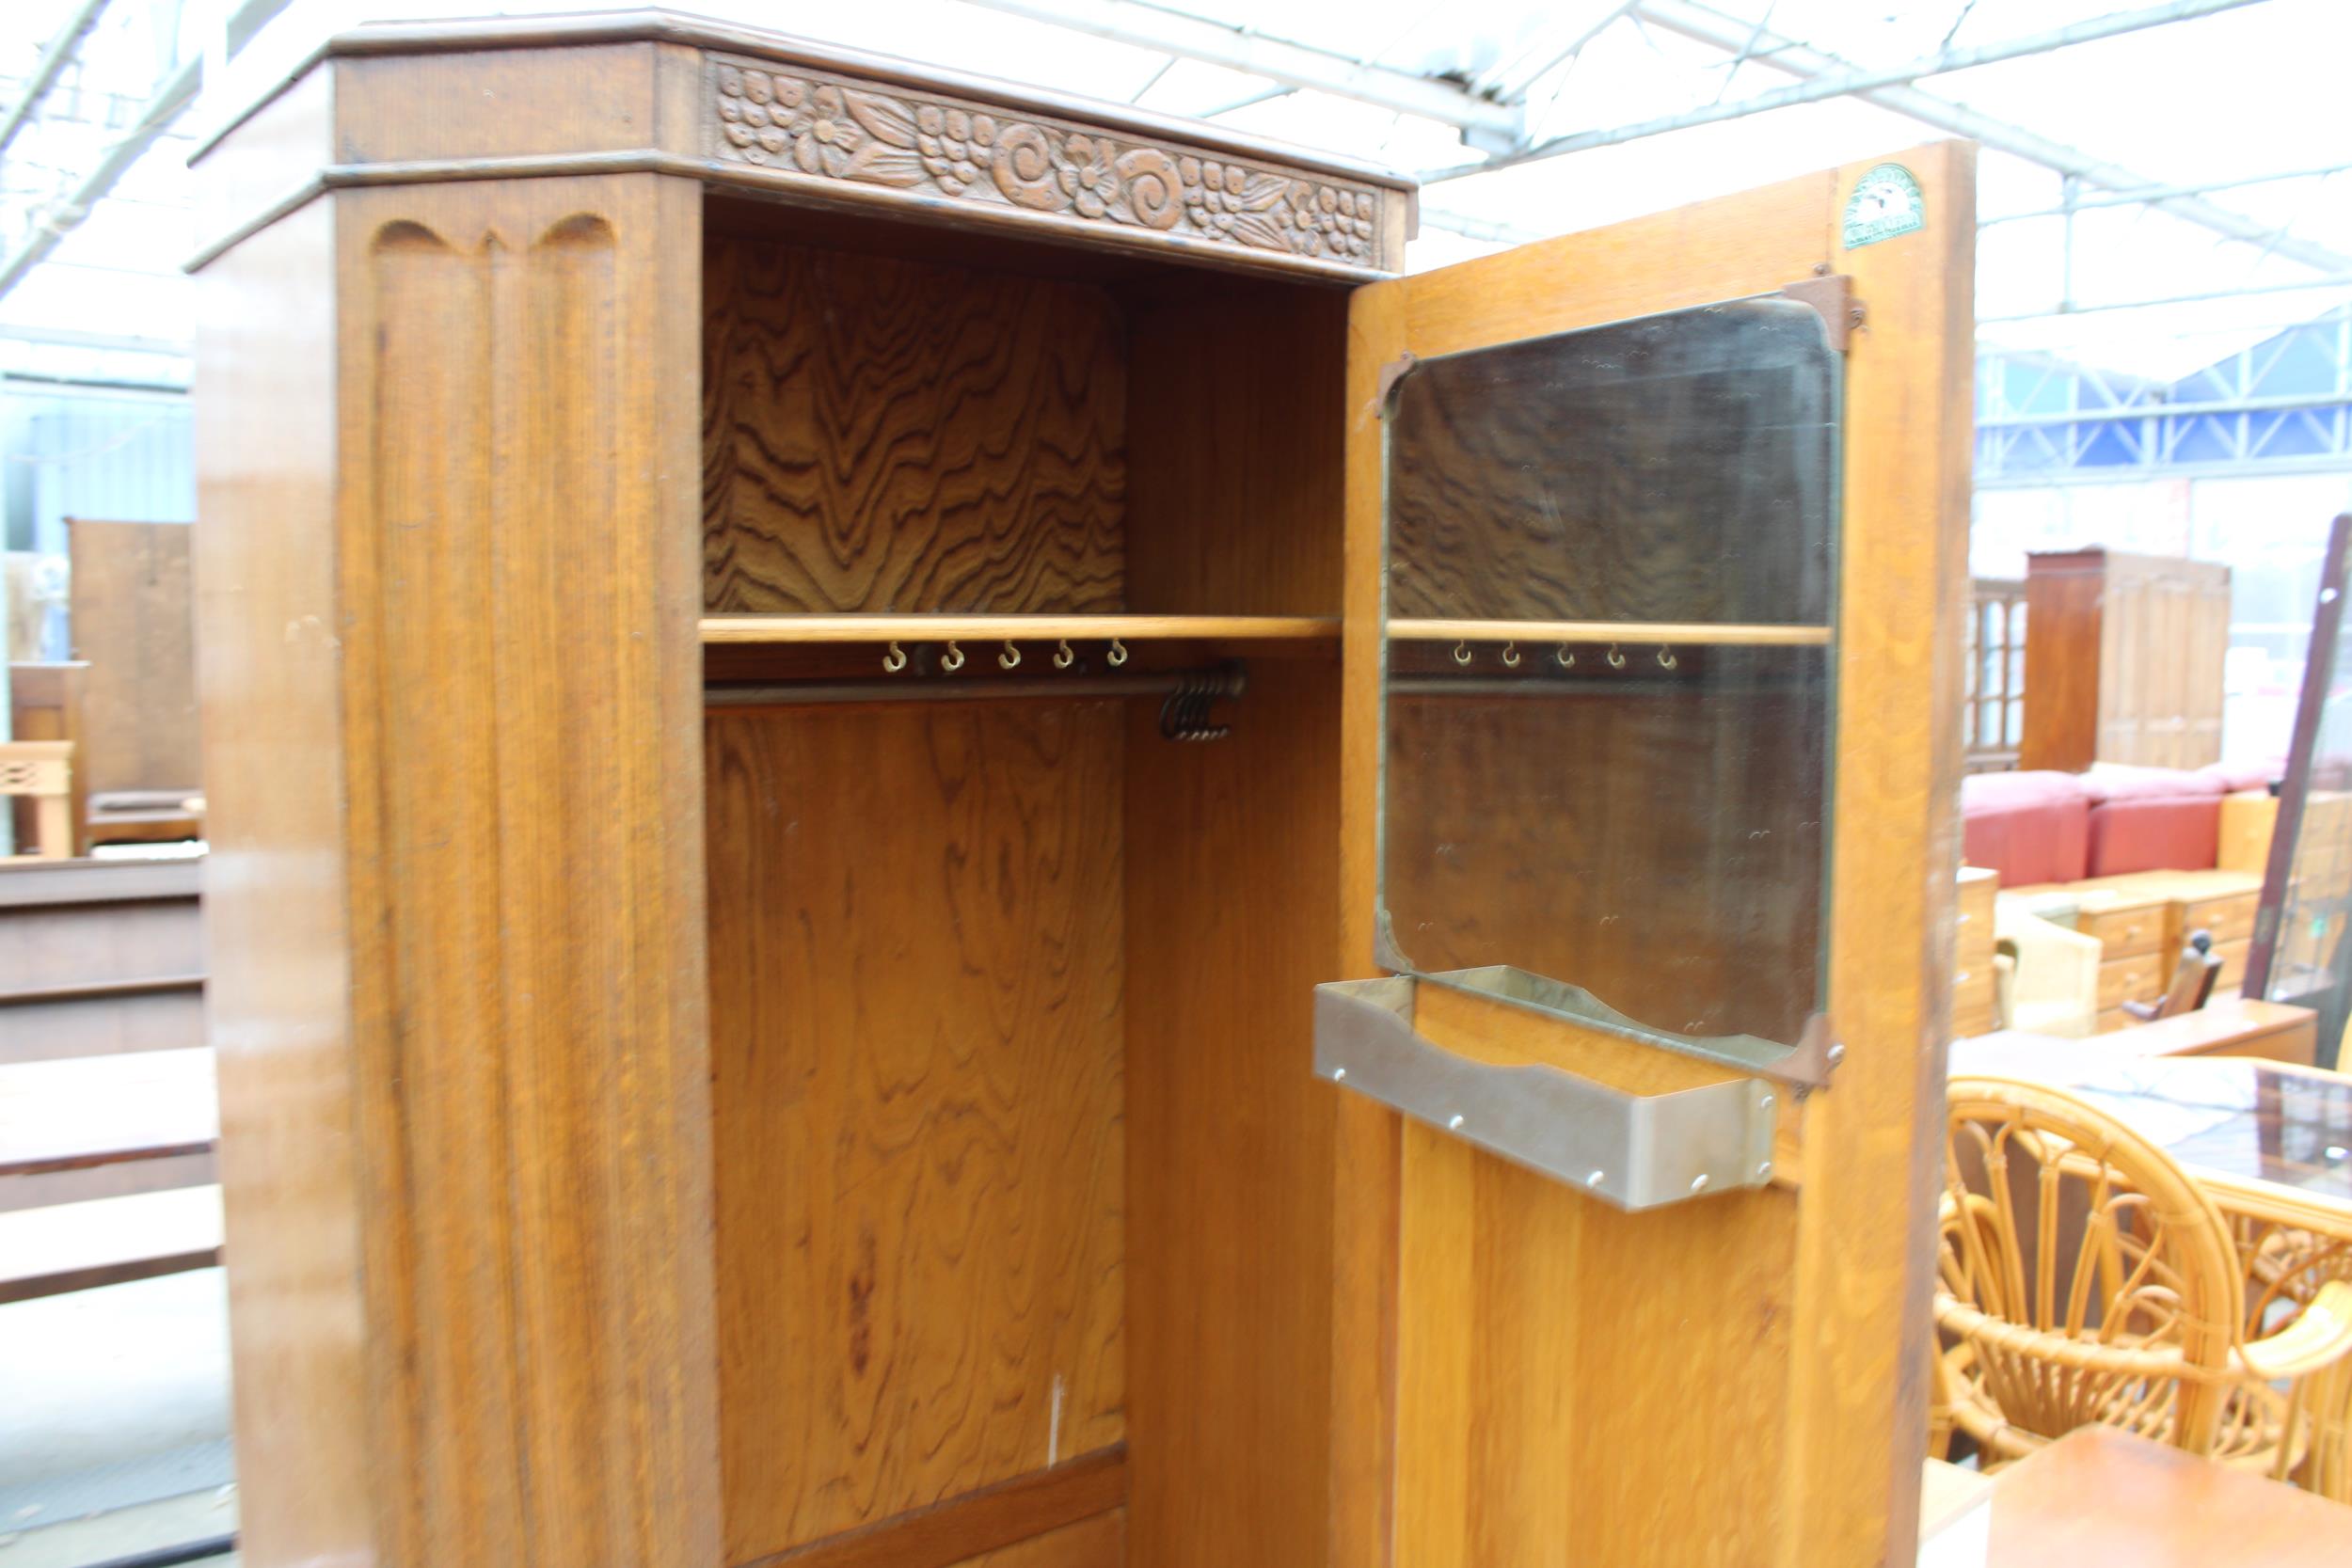 AN EARLY 20TH CENTURY OAK HALL WARDROBE WITH CARVED PANEL DOOR 30" WIDE - Image 2 of 2